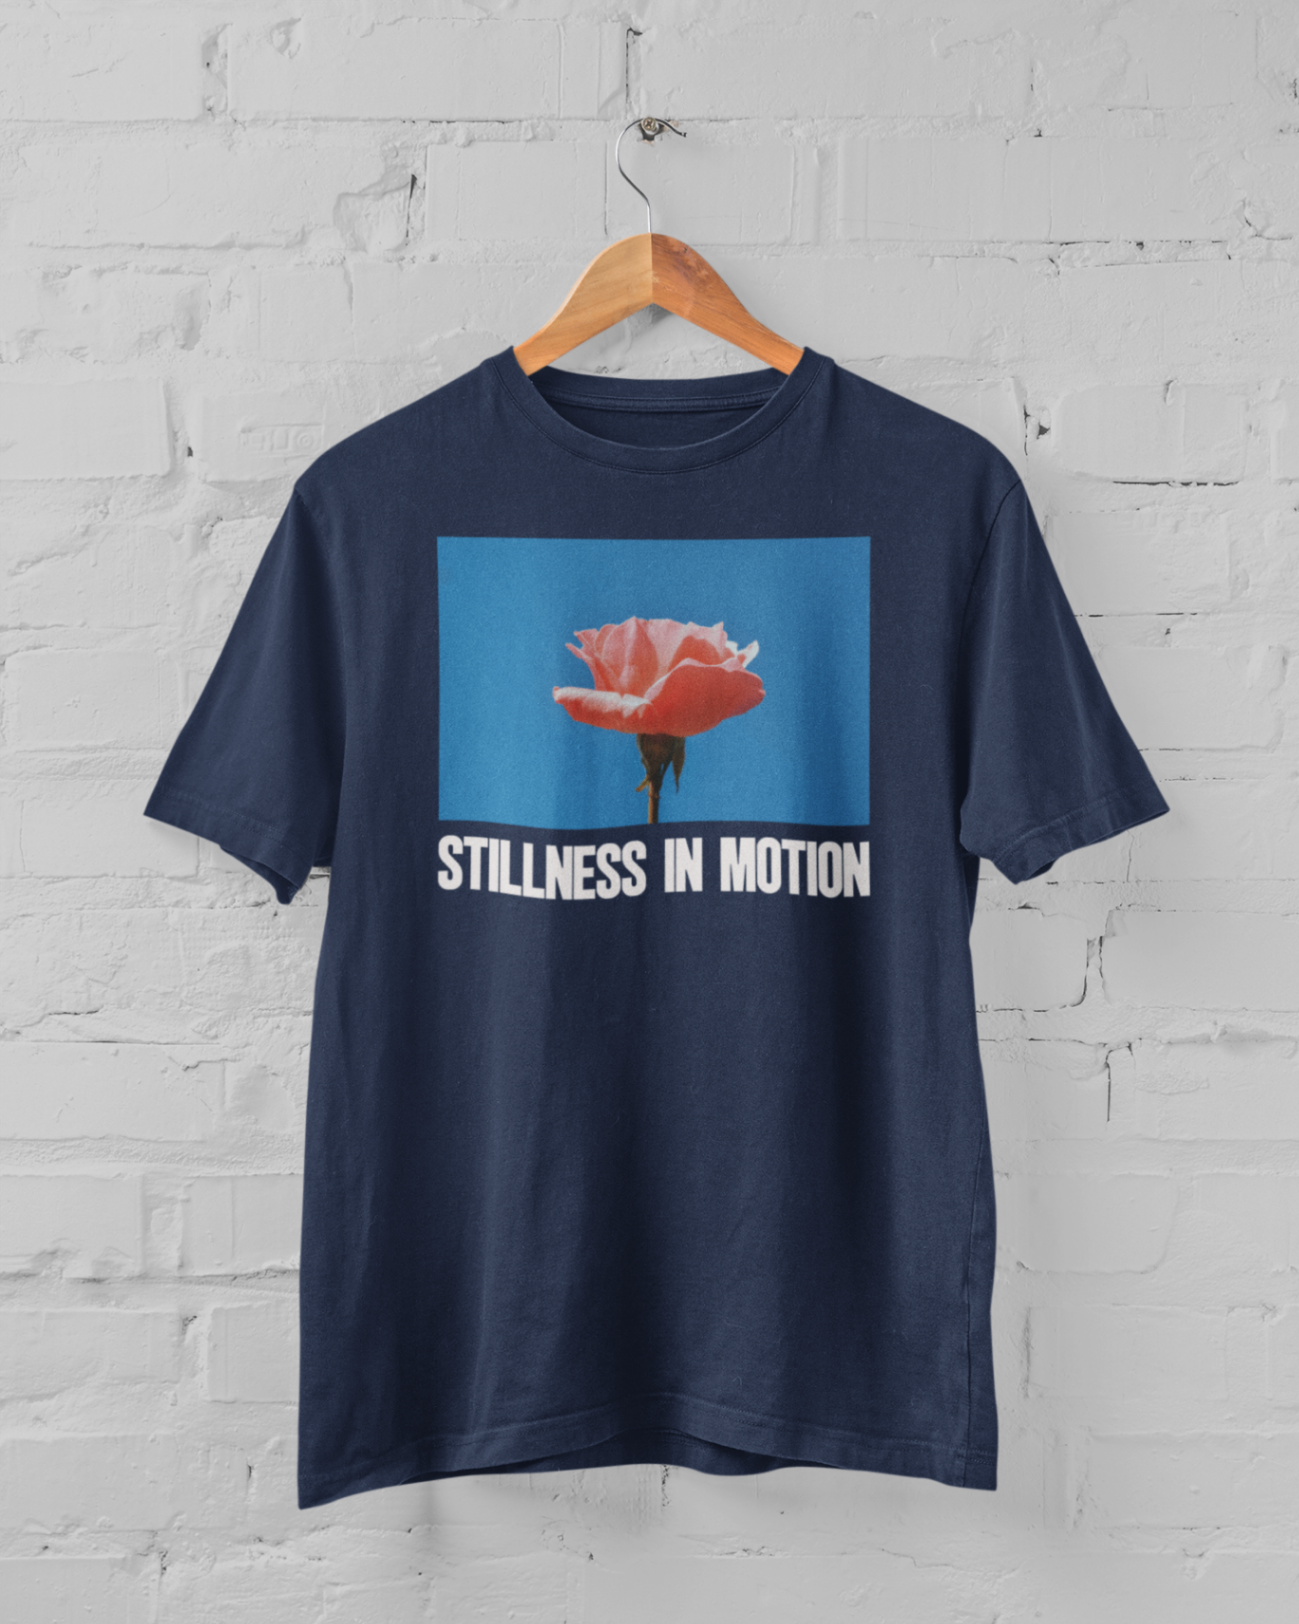 a navy tshirt with stillness in motion written in text under a pink flower over a sky blue backround